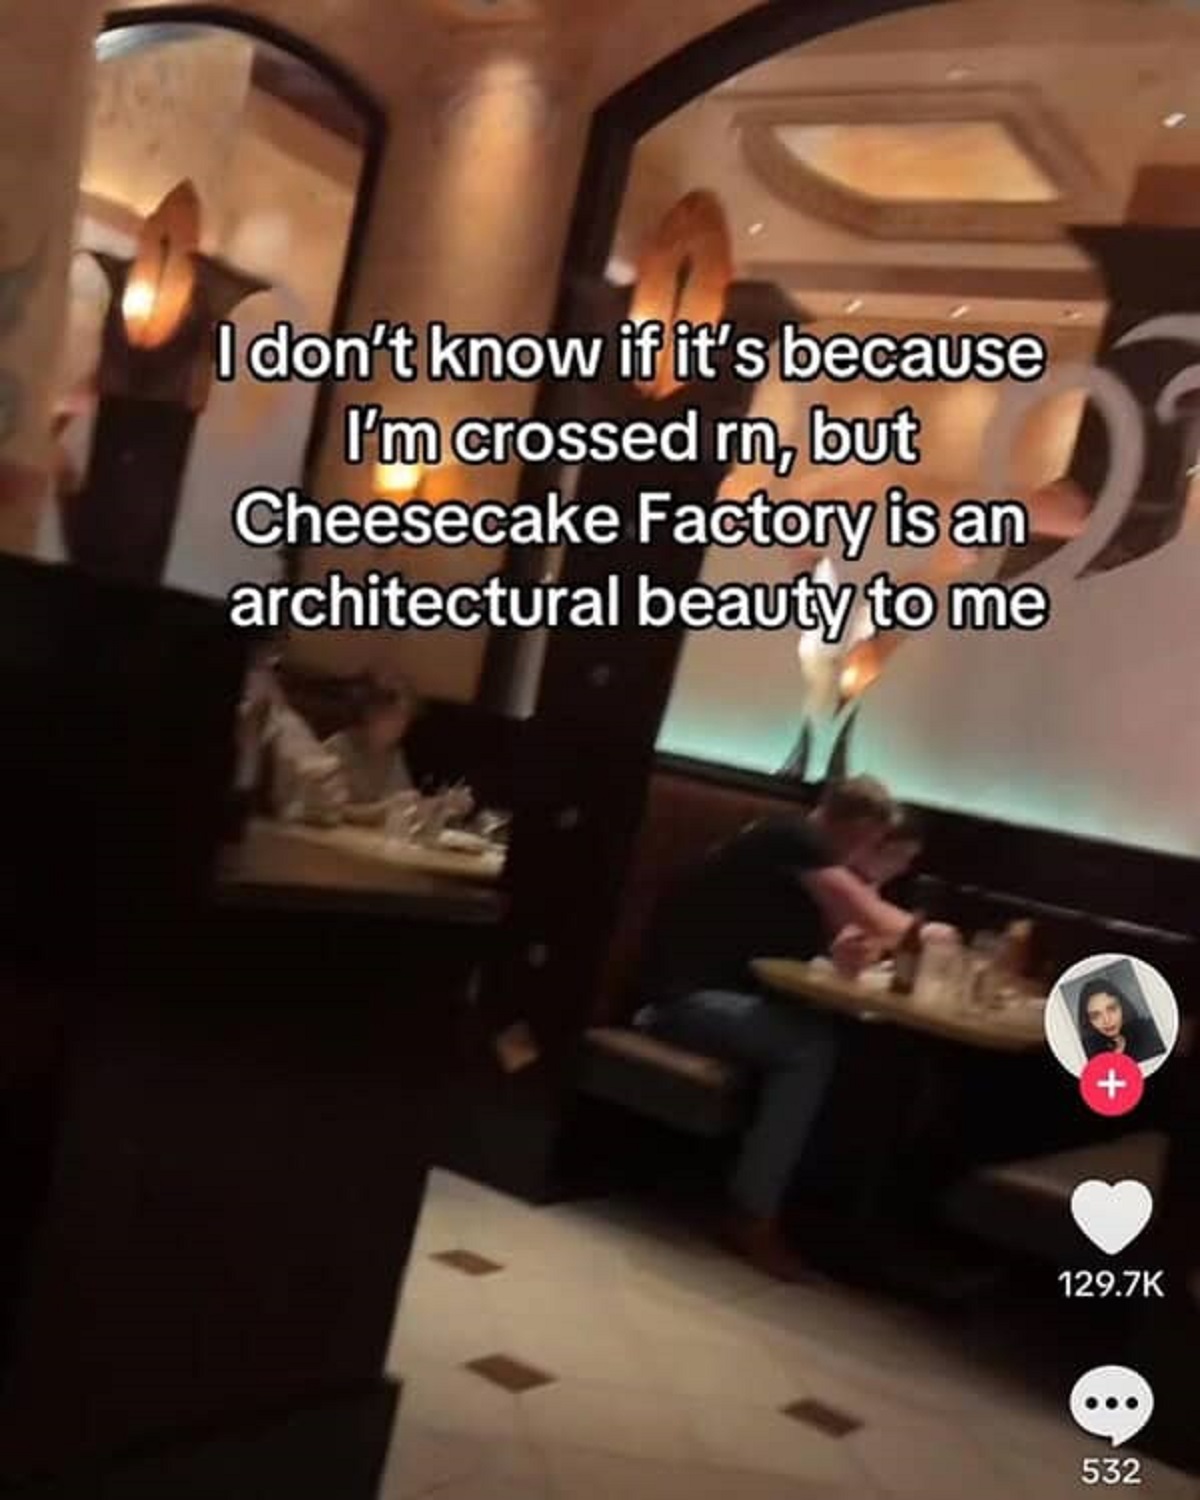 screenshot - I don't know if it's because I'm crossed rn, but Cheesecake Factory is an architectural beauty to me 532